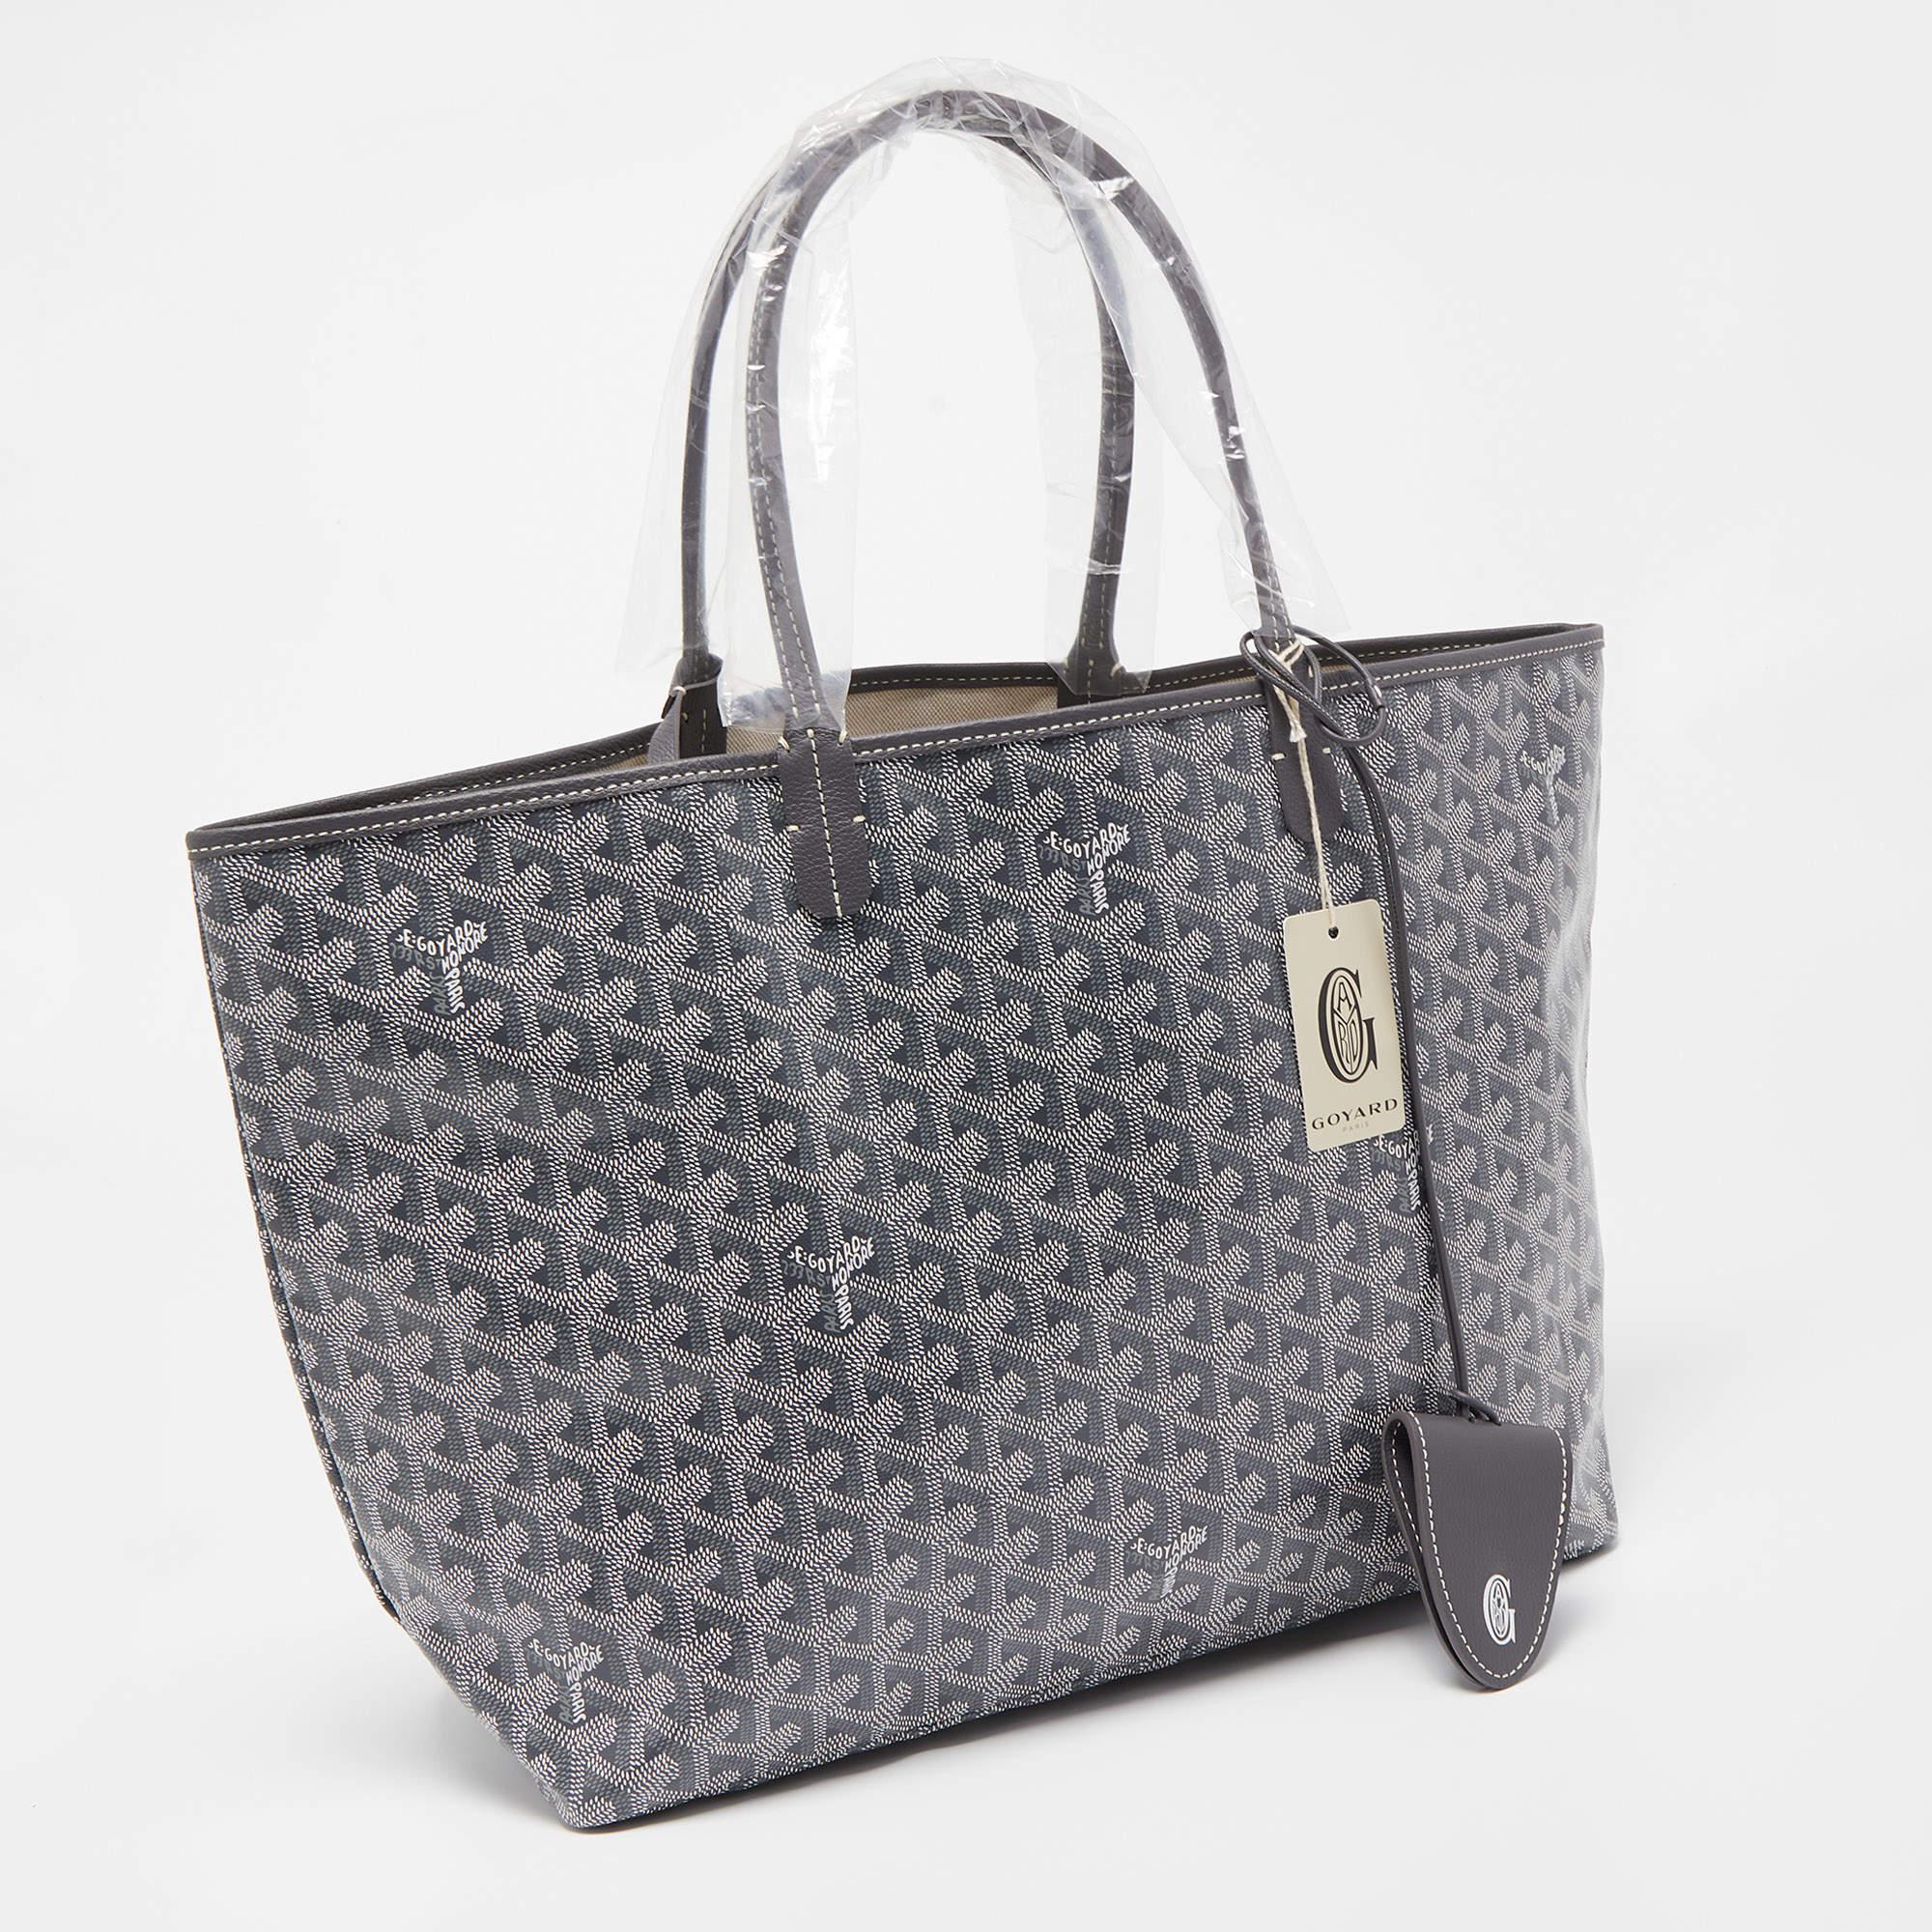 The Goyard Saint Louis tote is an elegant and versatile bag. It features the iconic Goyardine pattern on durable canvas, accented with leather handles and trim. The bag includes a handy bag clip for added convenience, making it a stylish and